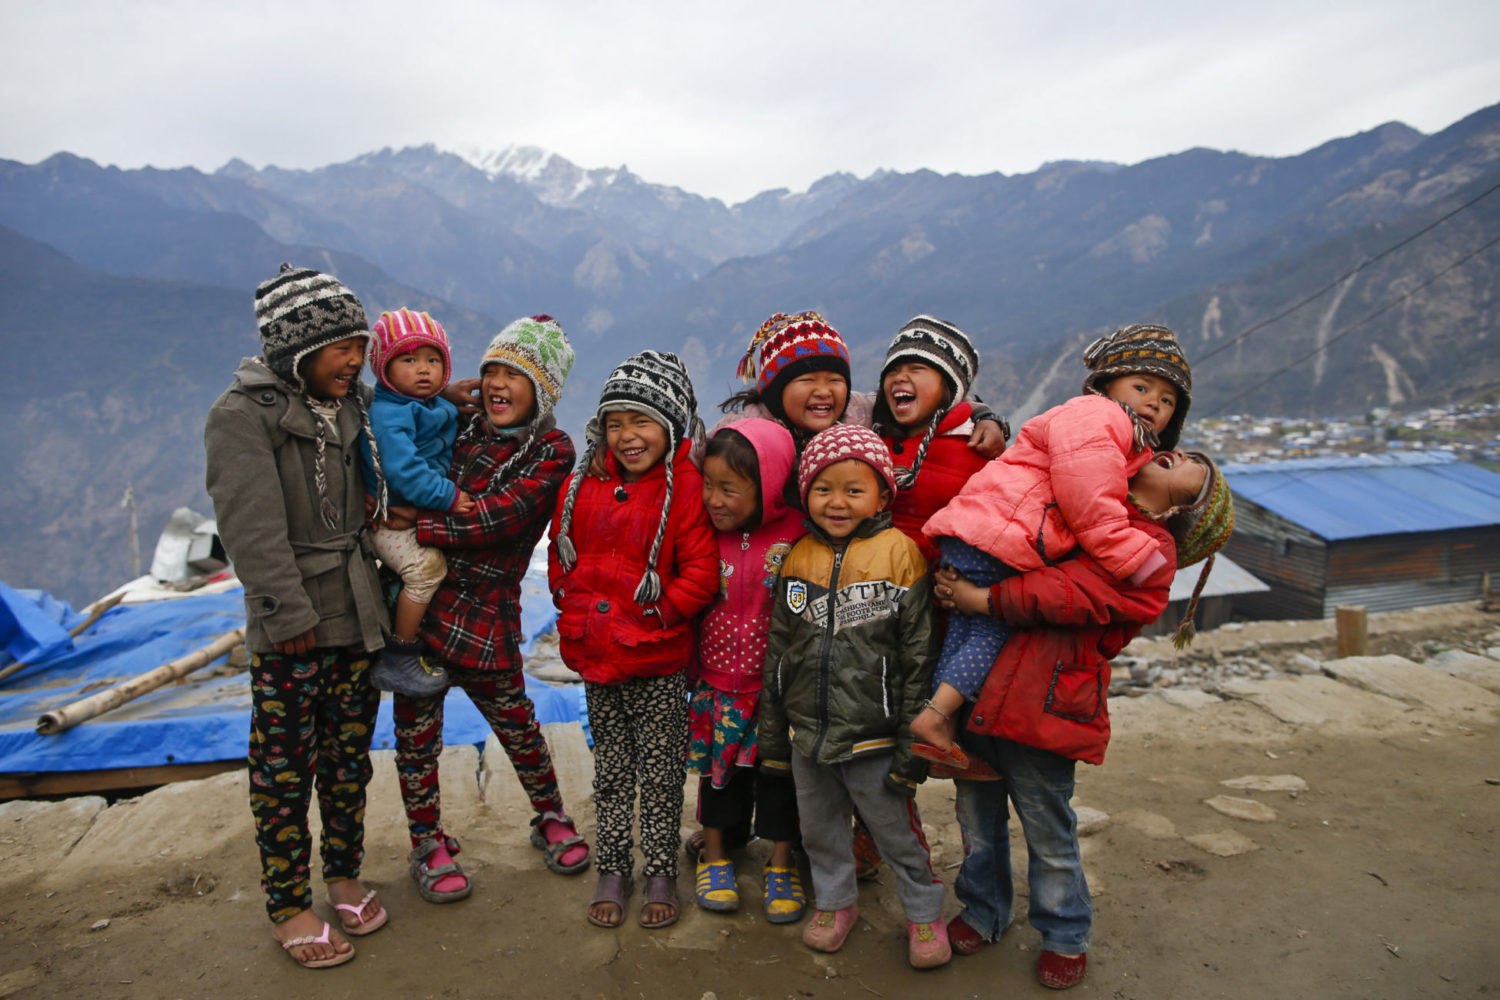 Group of children standing on a mountain laughing.